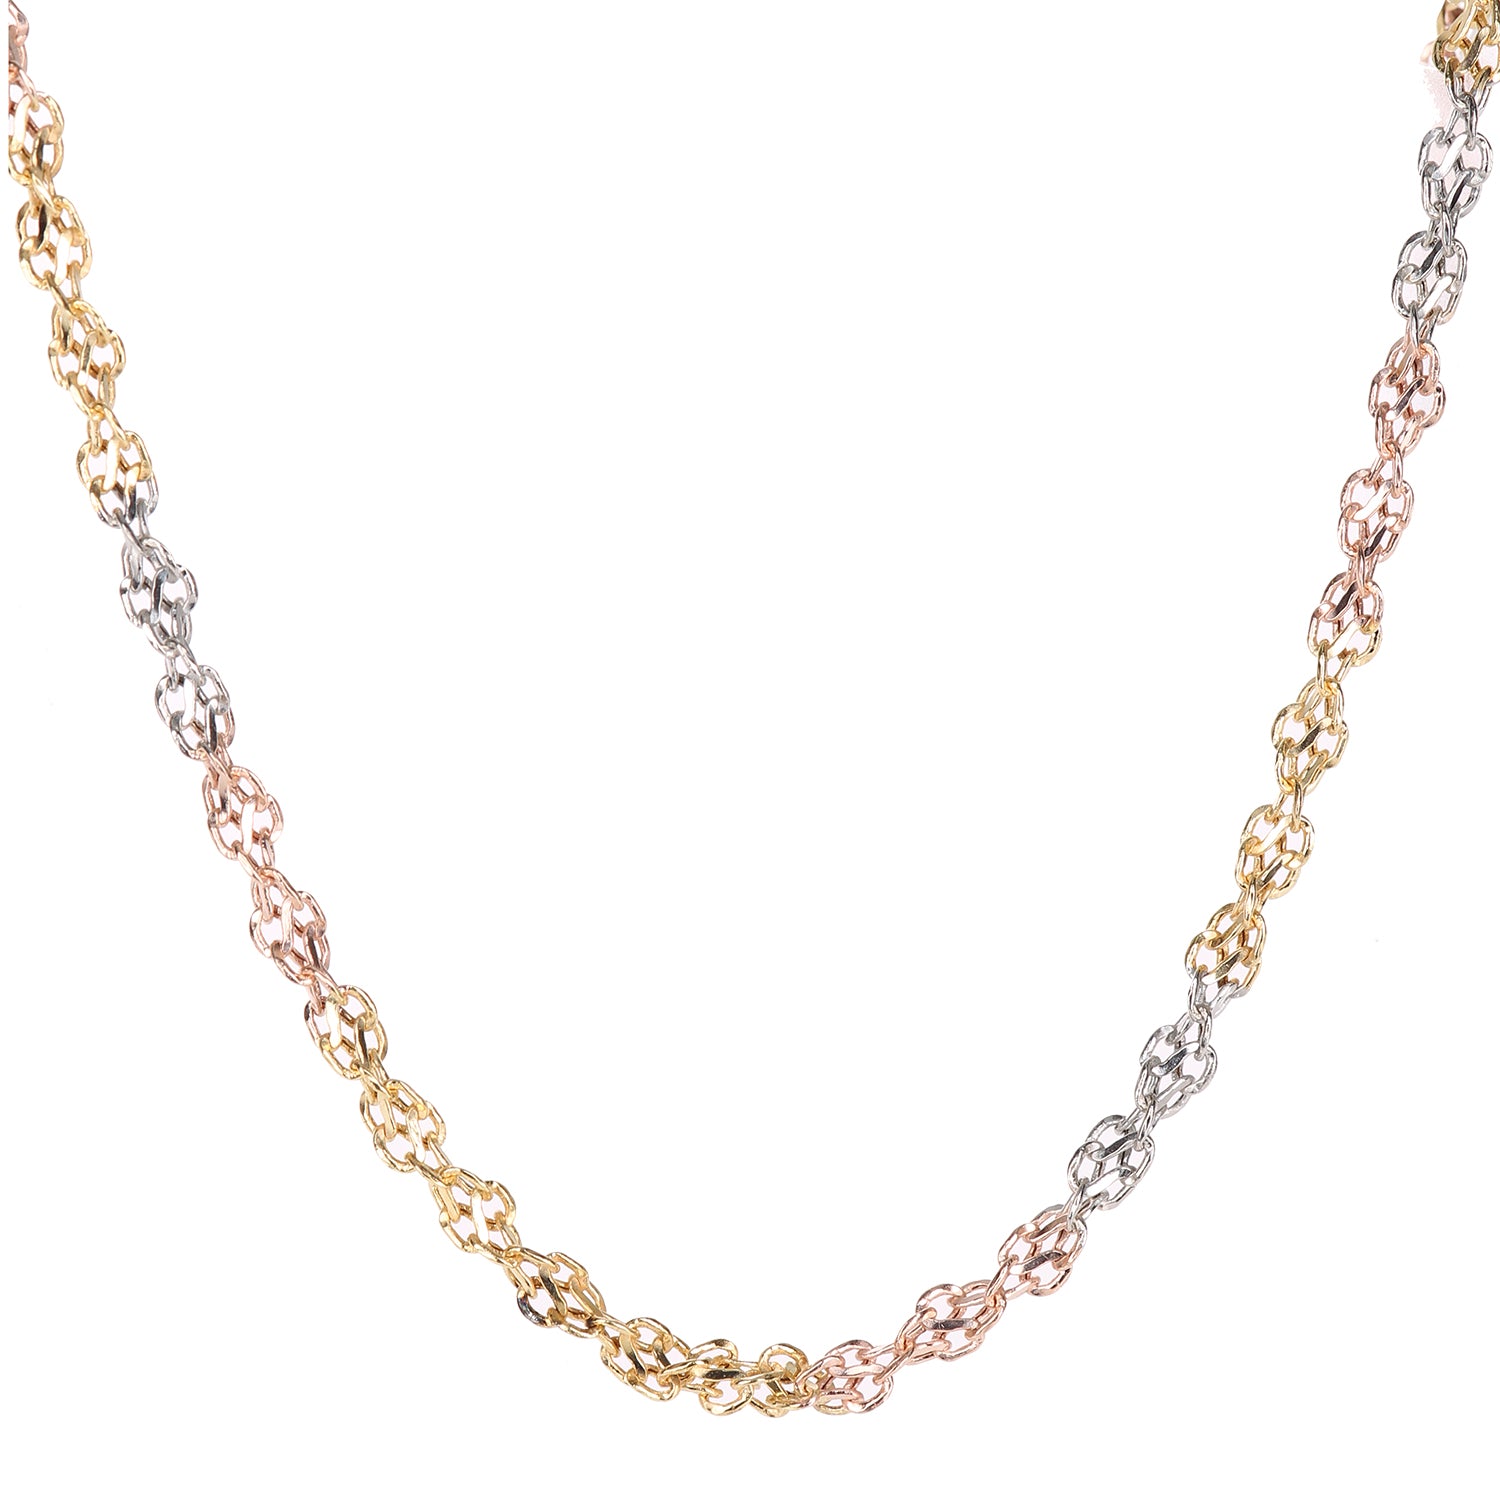 9ct 3 Colour Gold  Infinity Chain Necklace 18 inch - NK1AXL8033Col